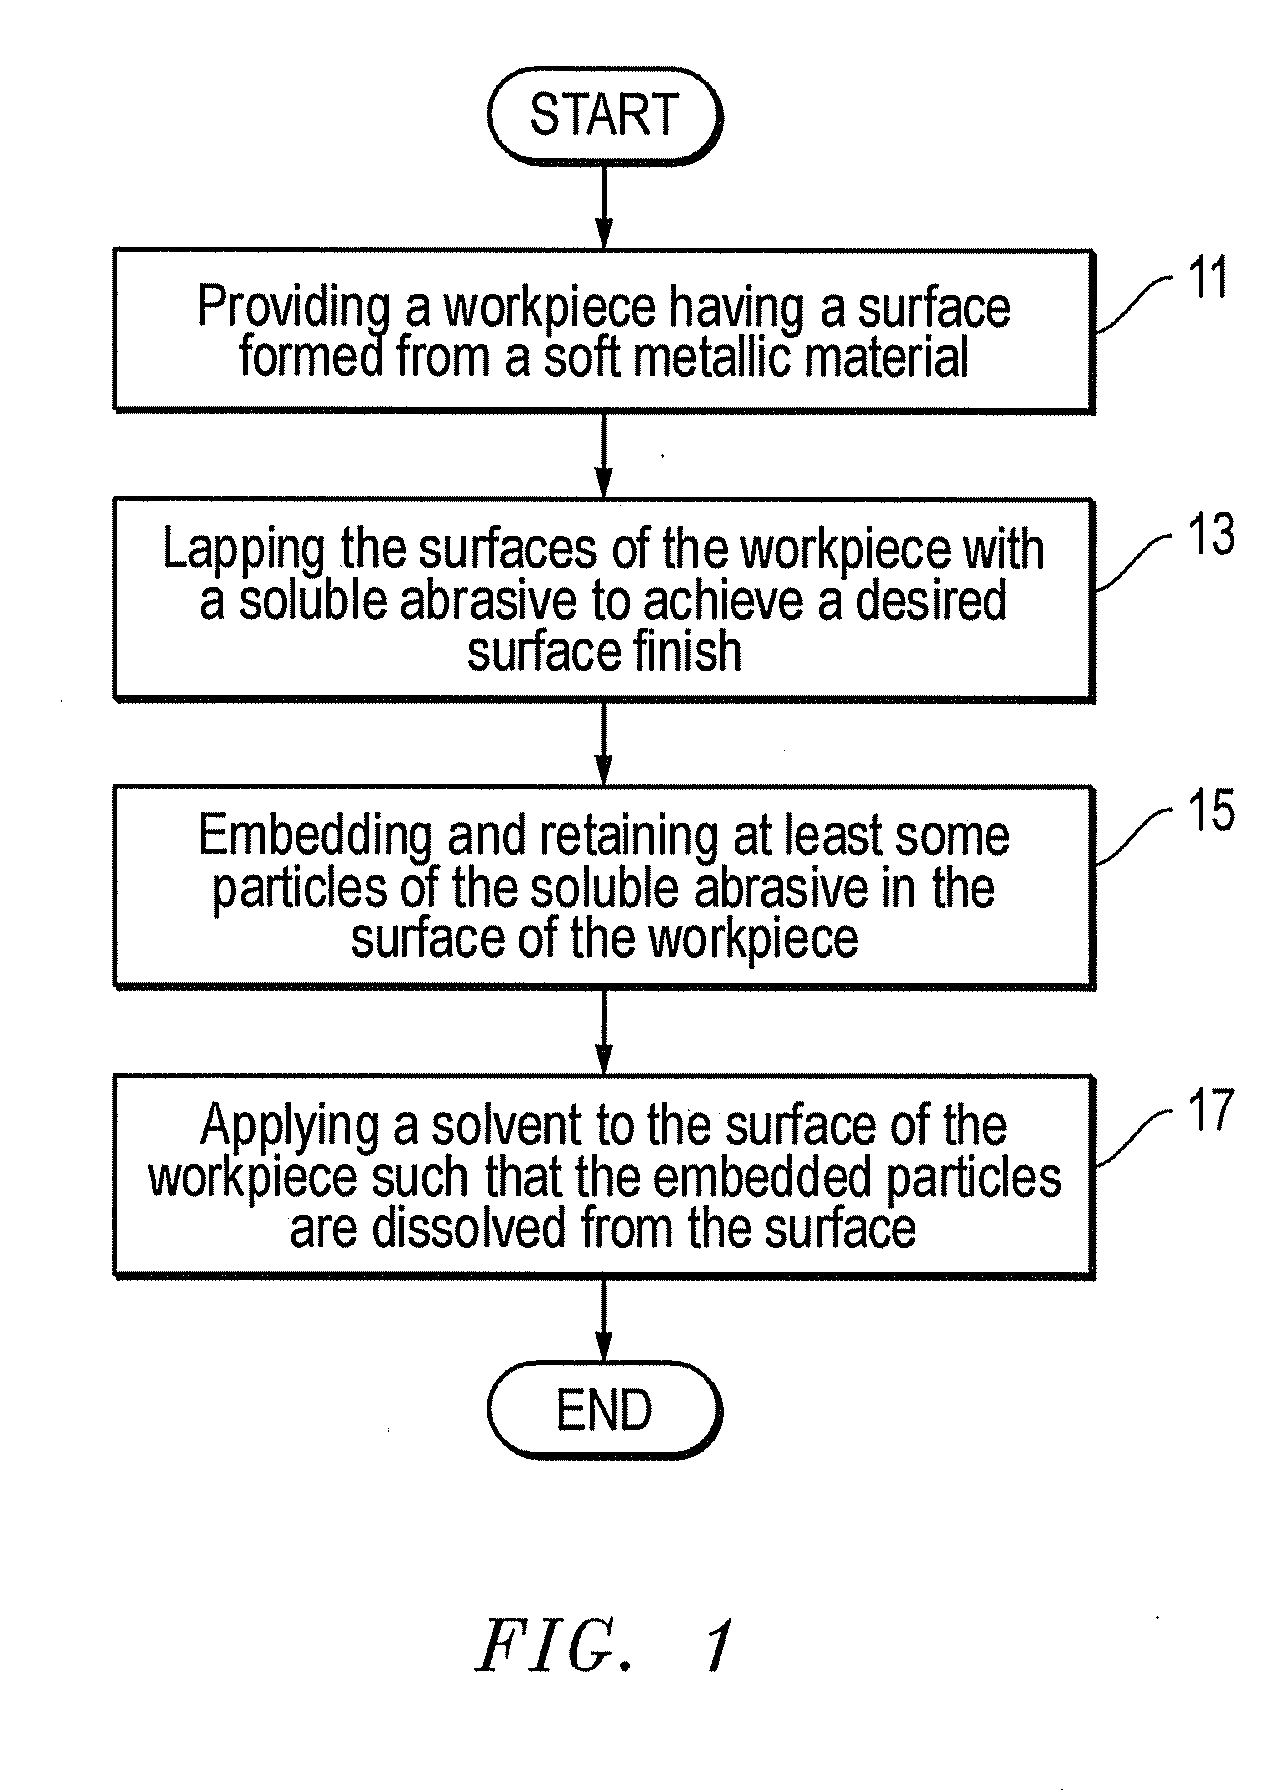 System, method and apparatus for lapping workpieces with soluble abrasives